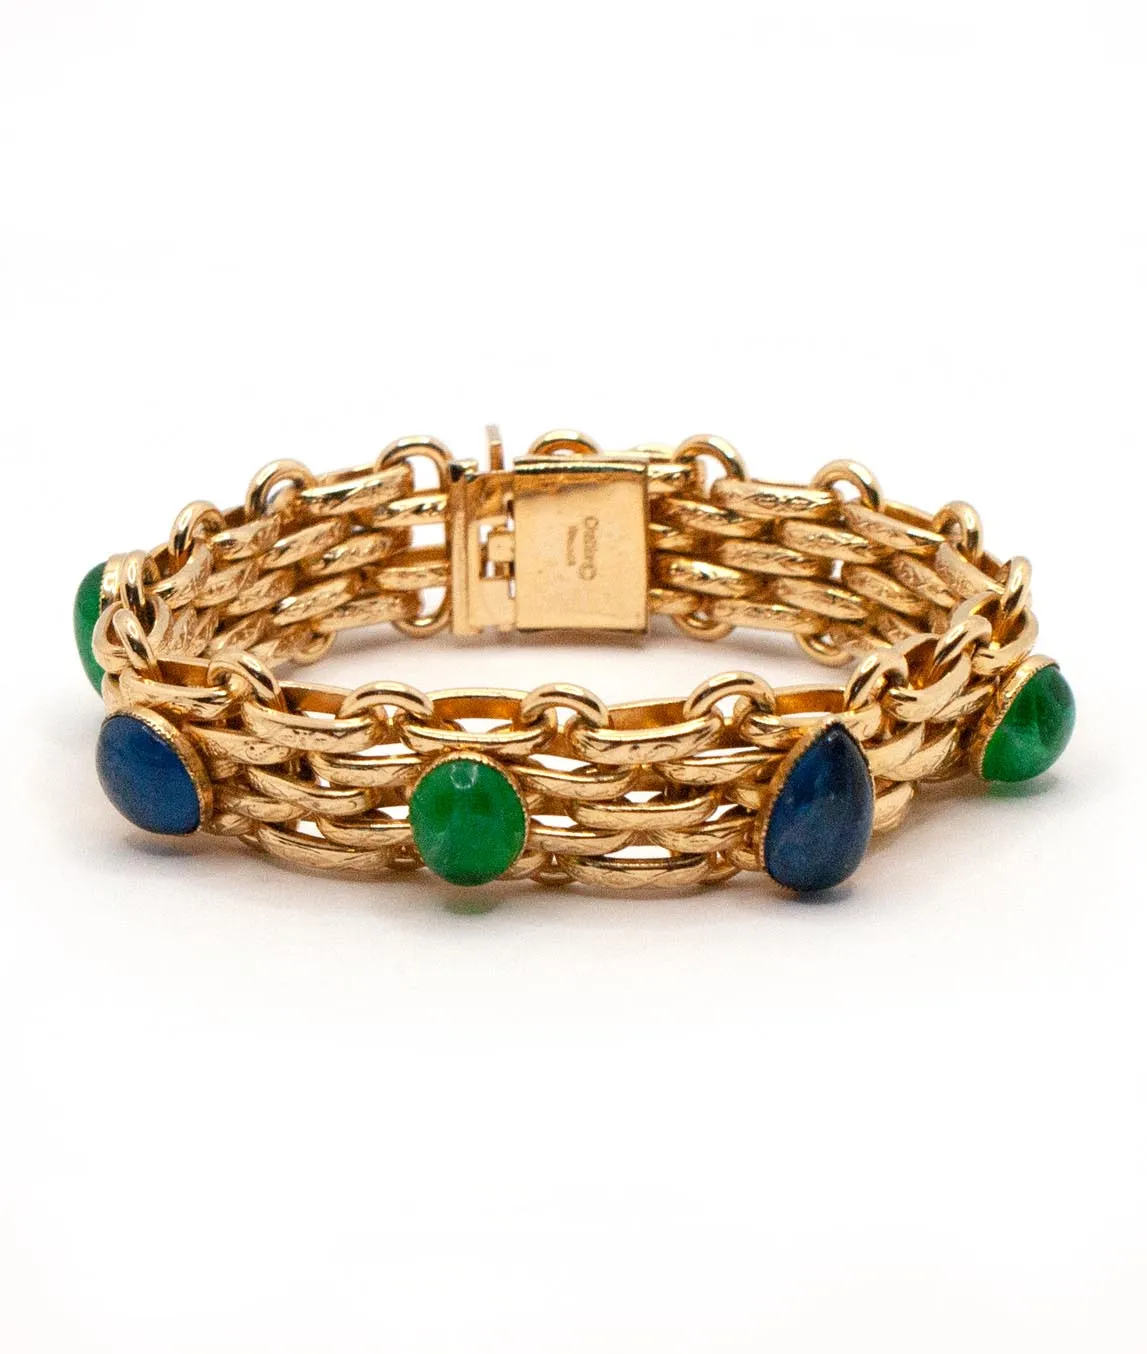 Gold plated bracelet with green and blue poured glass gems by Christian Dior